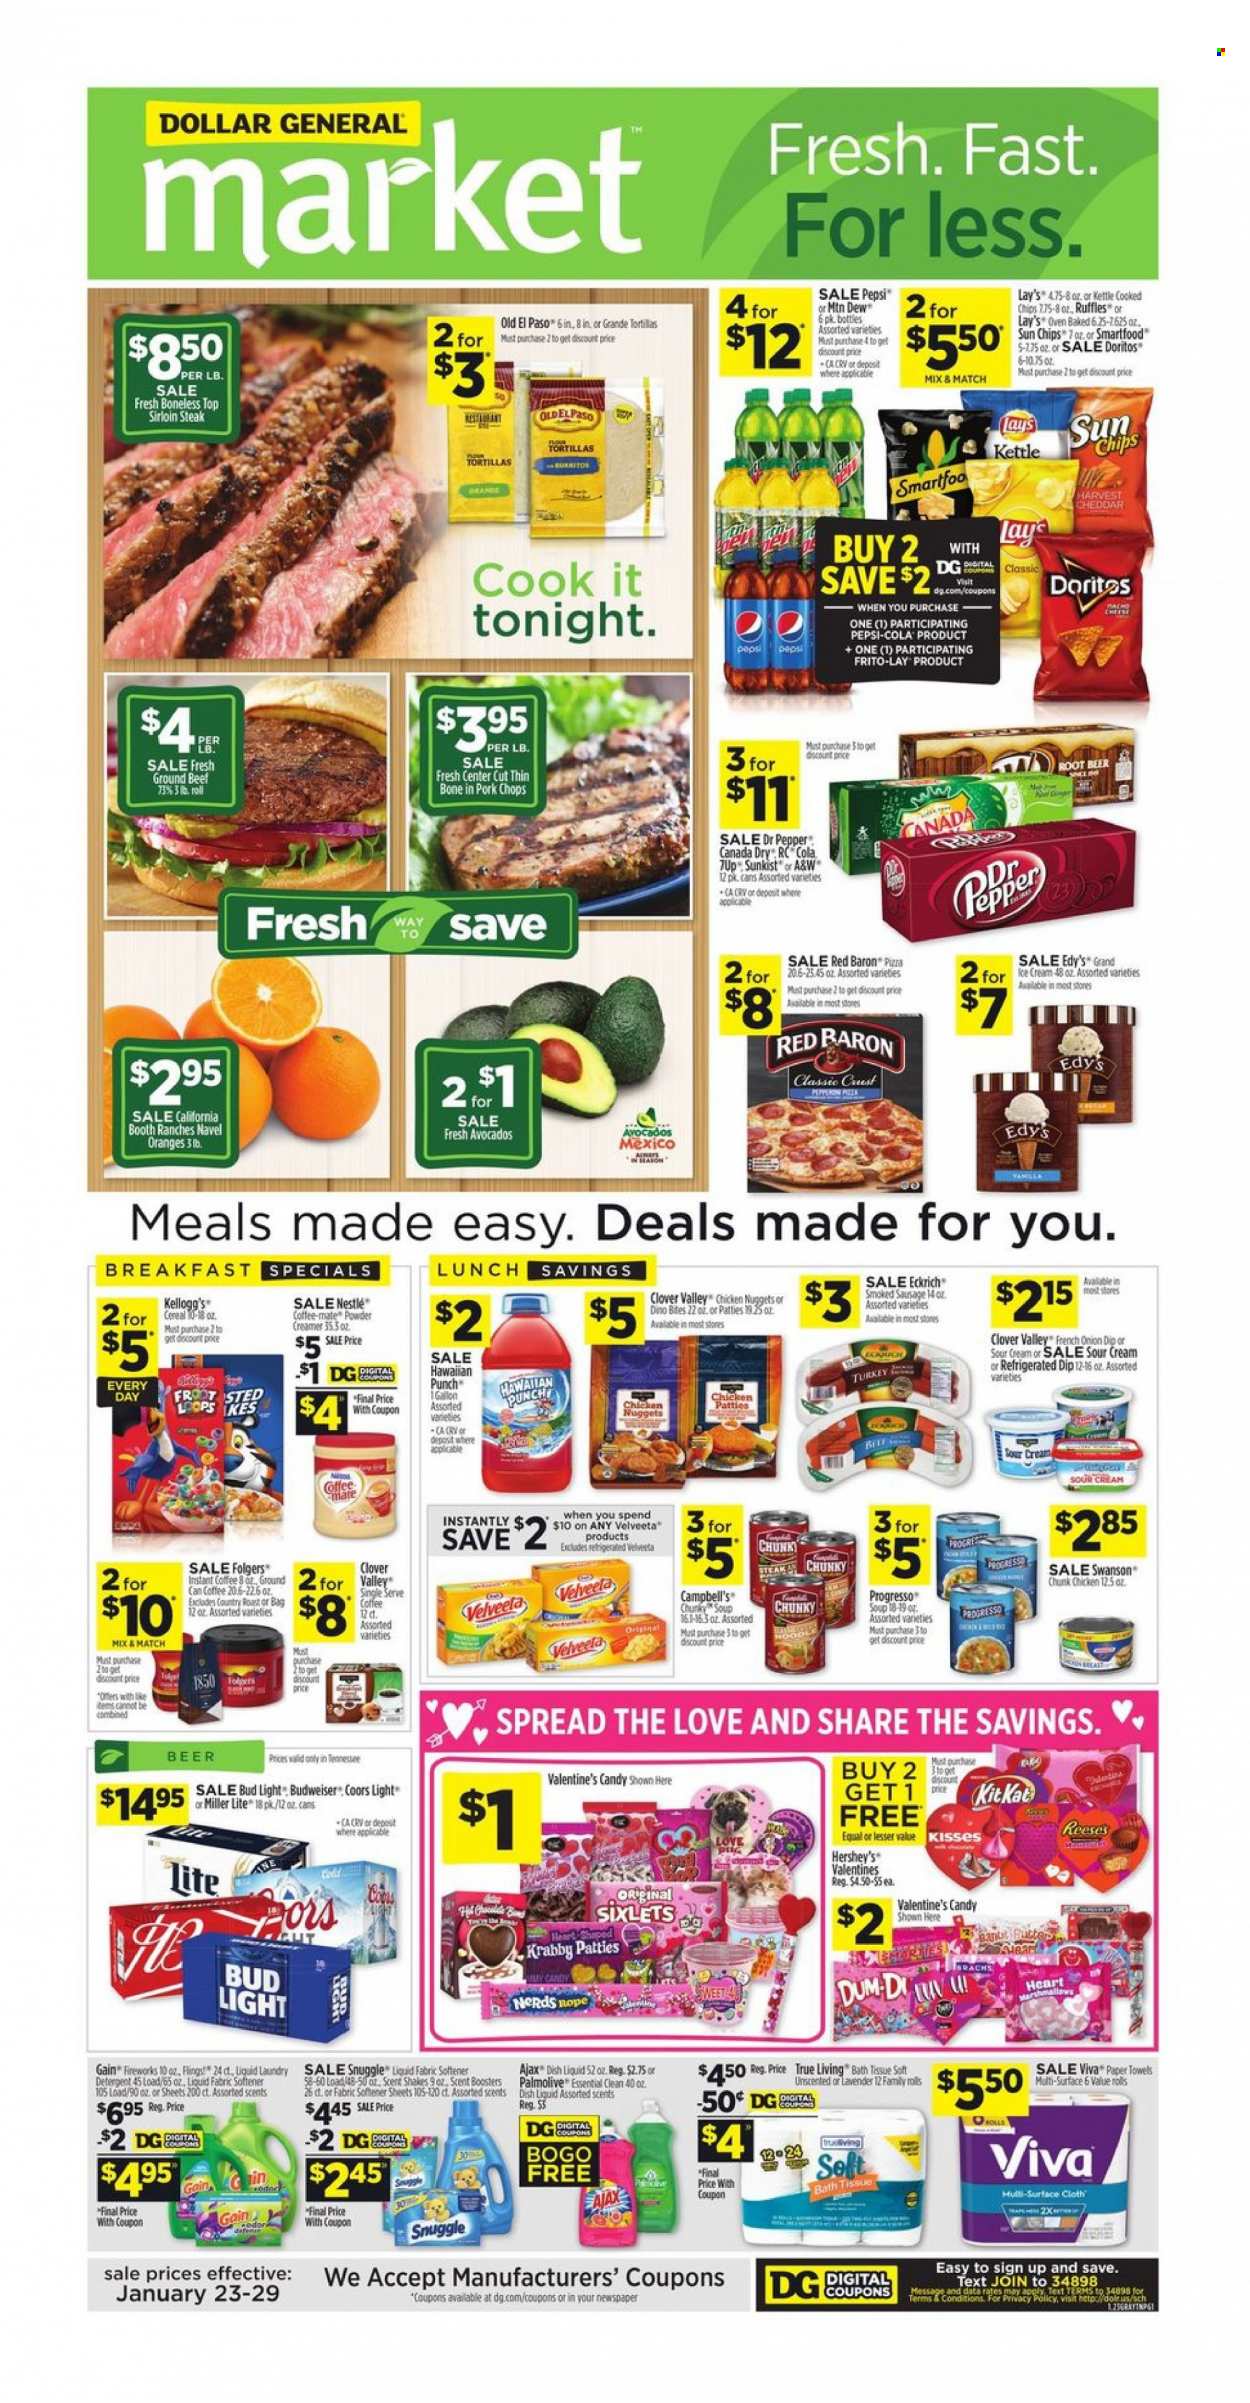 thumbnail - Dollar General Flyer - 01/23/2022 - 01/29/2022 - Sales products - tortillas, Old El Paso, avocado, oranges, Campbell's, nuggets, Progresso, cheese, Clover, shake, sour cream, creamer, dip, Reese's, Hershey's, chicken patties, Red Baron, Nestlé, Kellogg's, Doritos, chips, Lay’s, kettle, Smartfood, Frito-Lay, Ruffles, cereals, Canada Dry, Mountain Dew, Pepsi, Dr. Pepper, A&W, instant coffee, Folgers, punch, beer, Bud Light, beef meat, beef sirloin, ground beef, steak, sirloin steak, pork chops, pork meat, bath tissue, kitchen towels, paper towels, Gain, Ajax, Snuggle, fabric softener, scent booster, Gain Fireworks, dishwashing liquid, Palmolive, Budweiser, Miller Lite, Coors, navel oranges. Page 1.